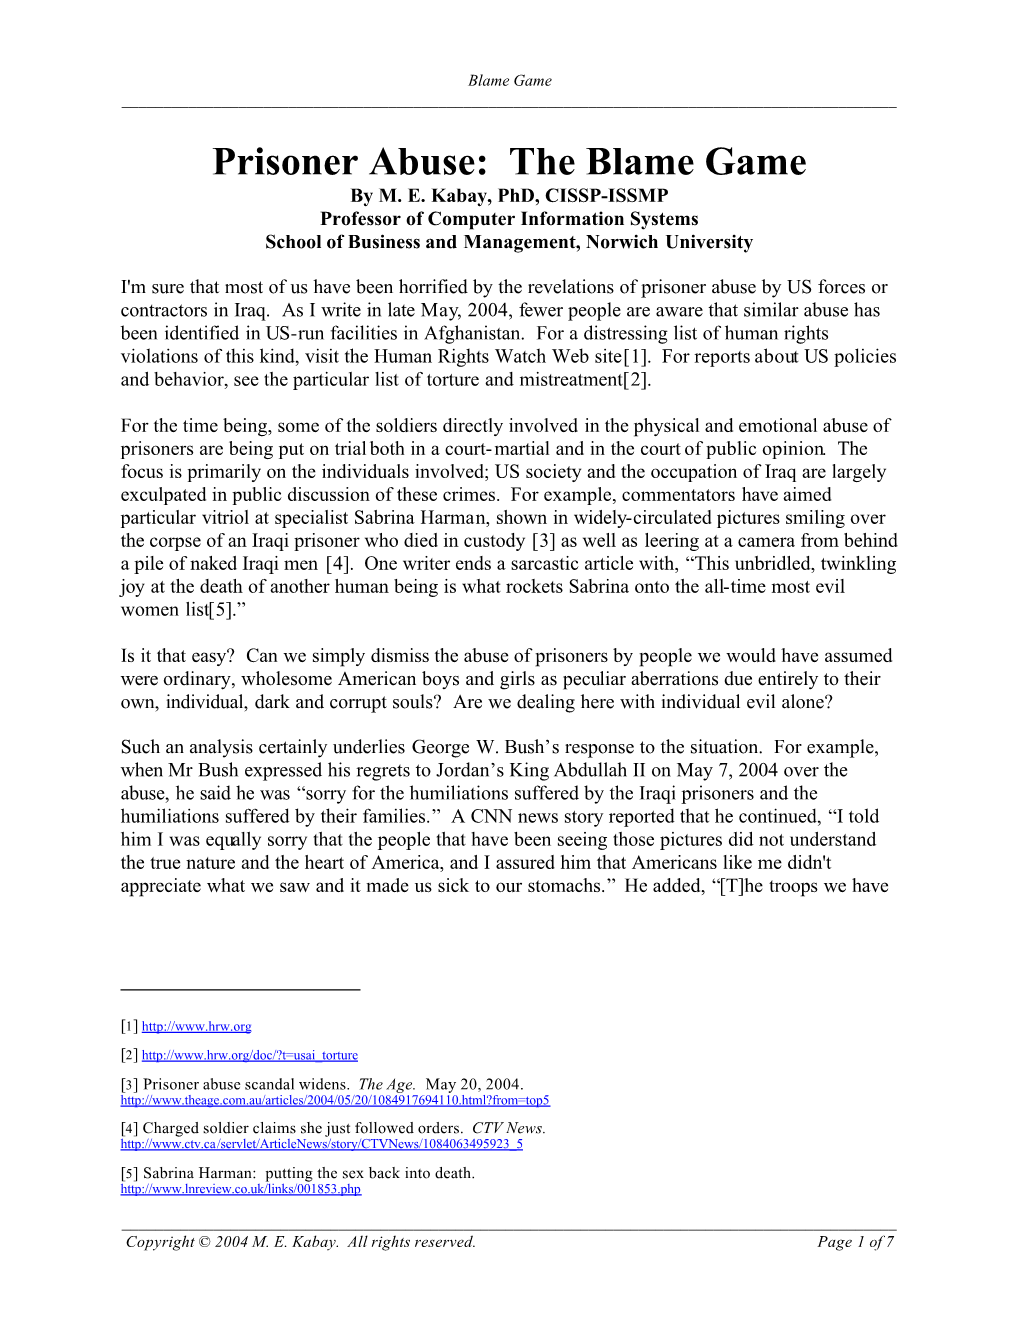 Prisoner Abuse: the Blame Game by M